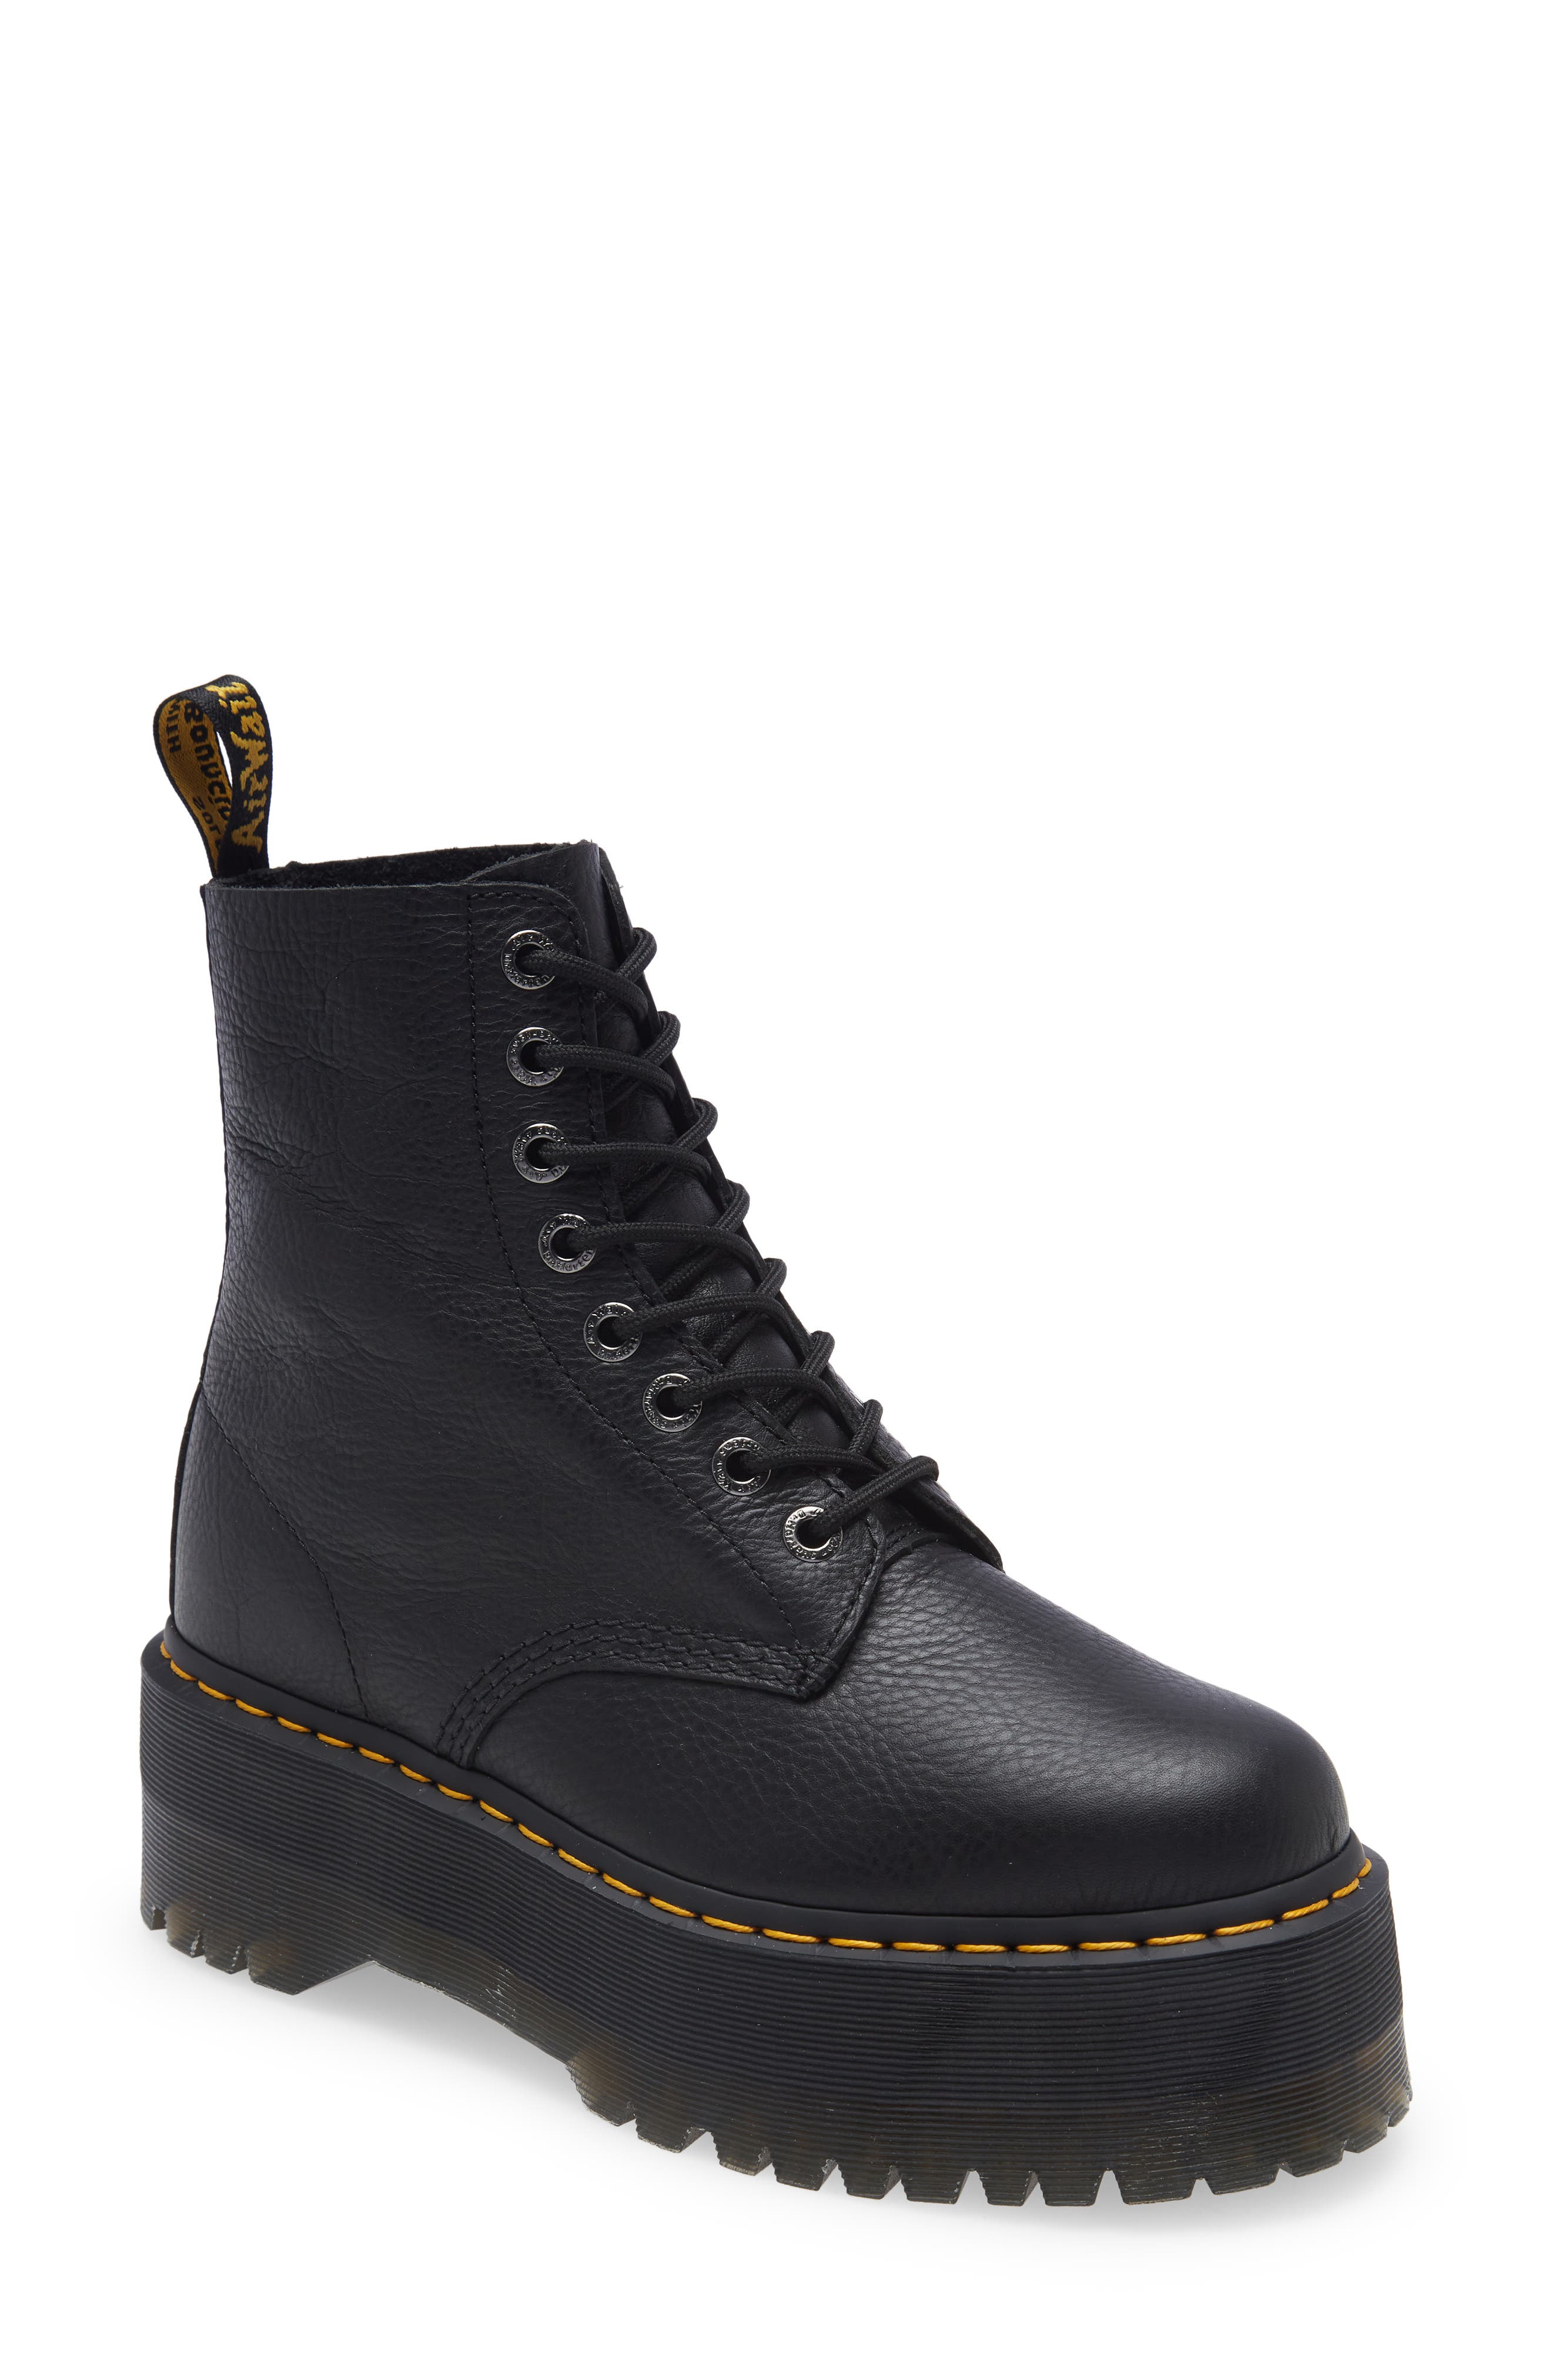 Dr. Martens 1460 Pascal Max Boot in Black at Nordstrom